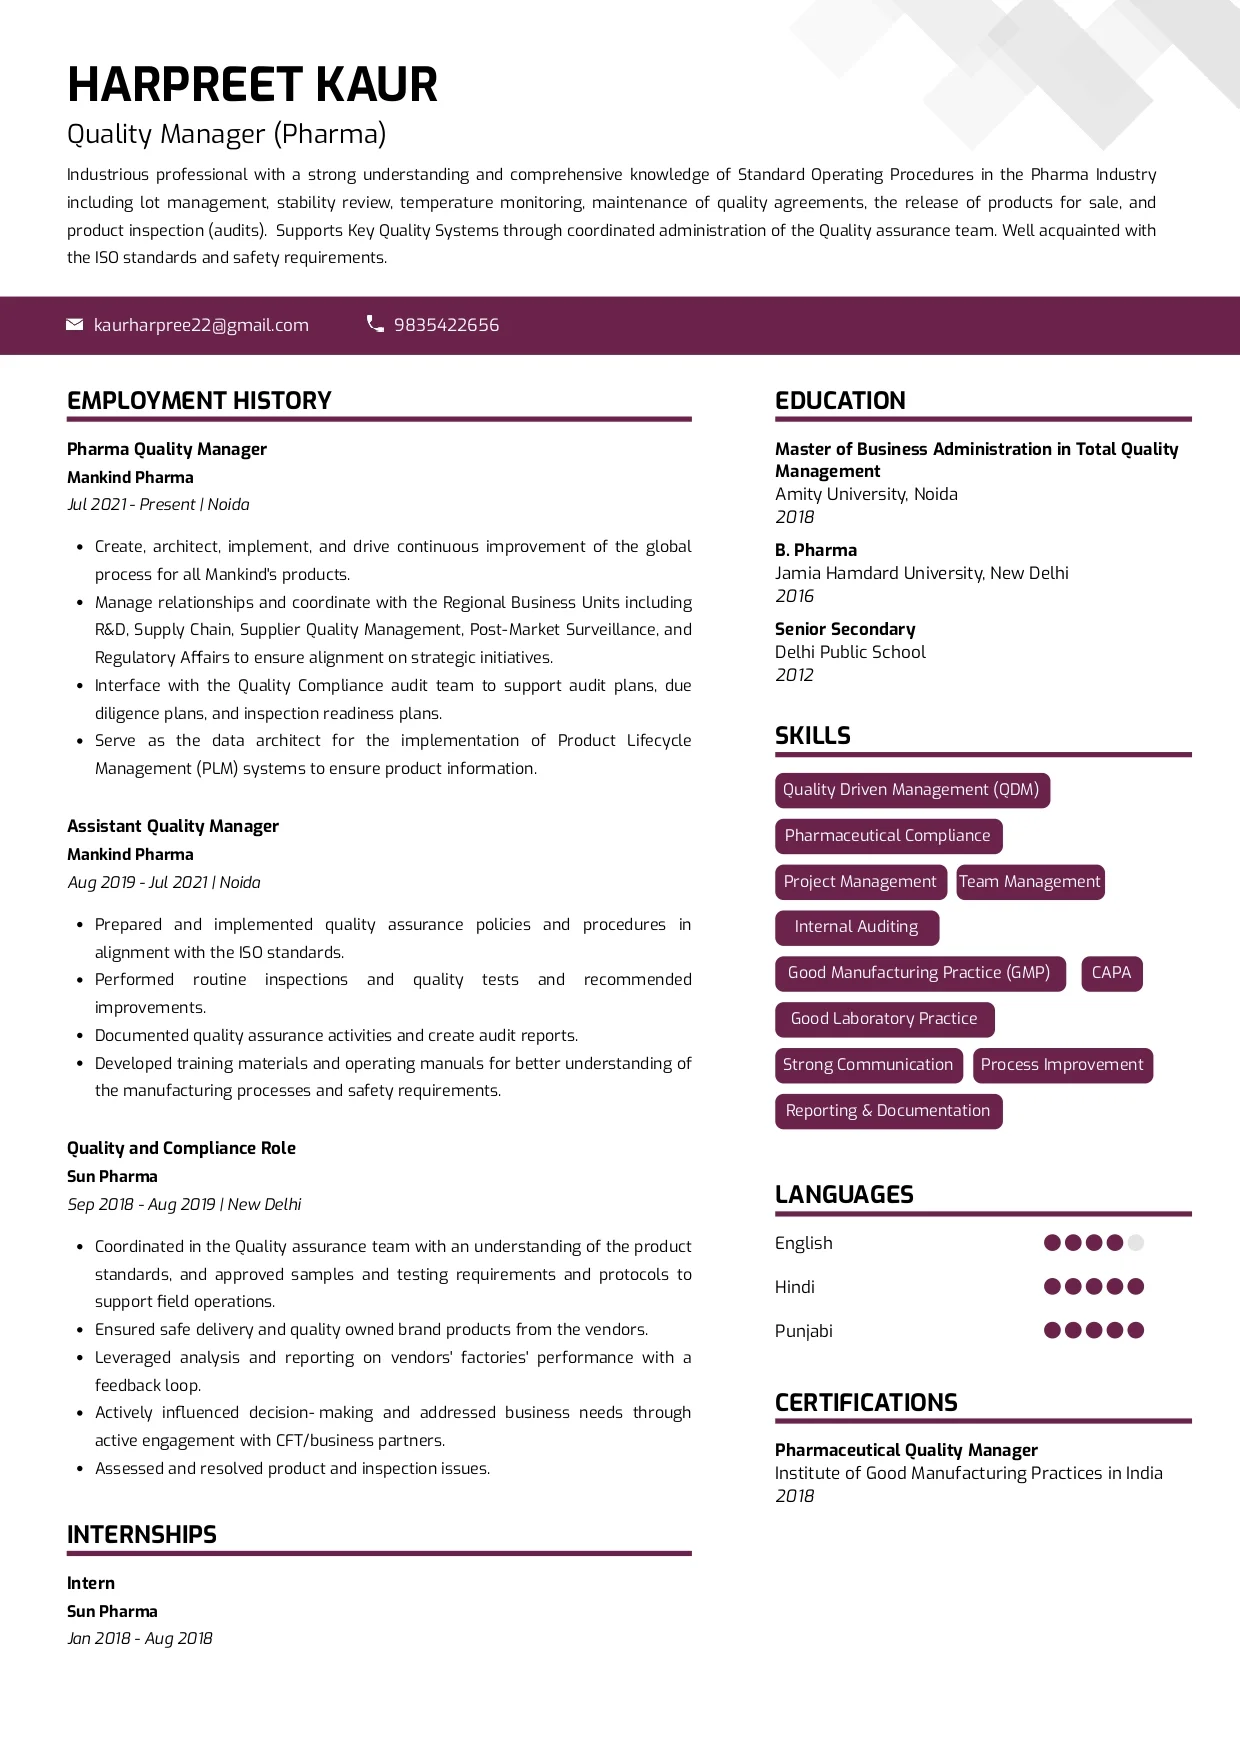 Sample Resume of Quality Manager - Pharma | Free Resume Templates & Samples on Resumod.co